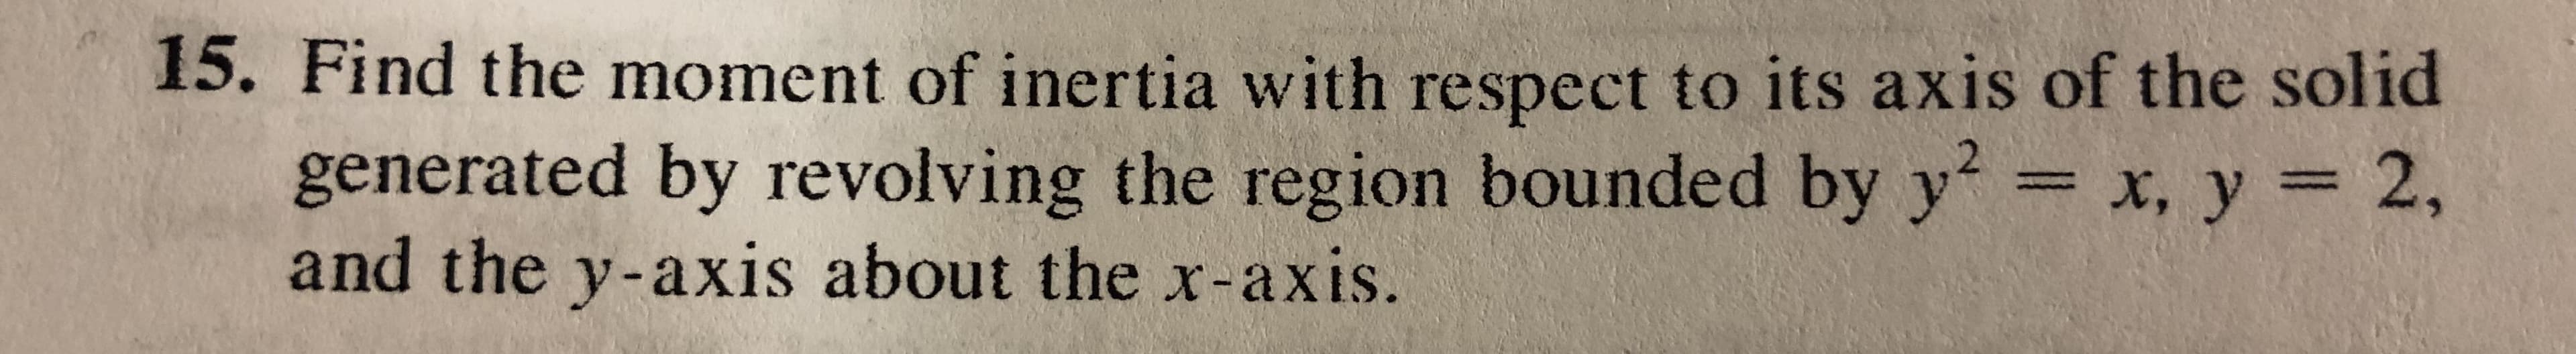 15. Find the moment of inertia with respect to its axis of the solid
2,
generated by revolving the region bounded by y2-x, y
and the y-axis about the r-axis.
